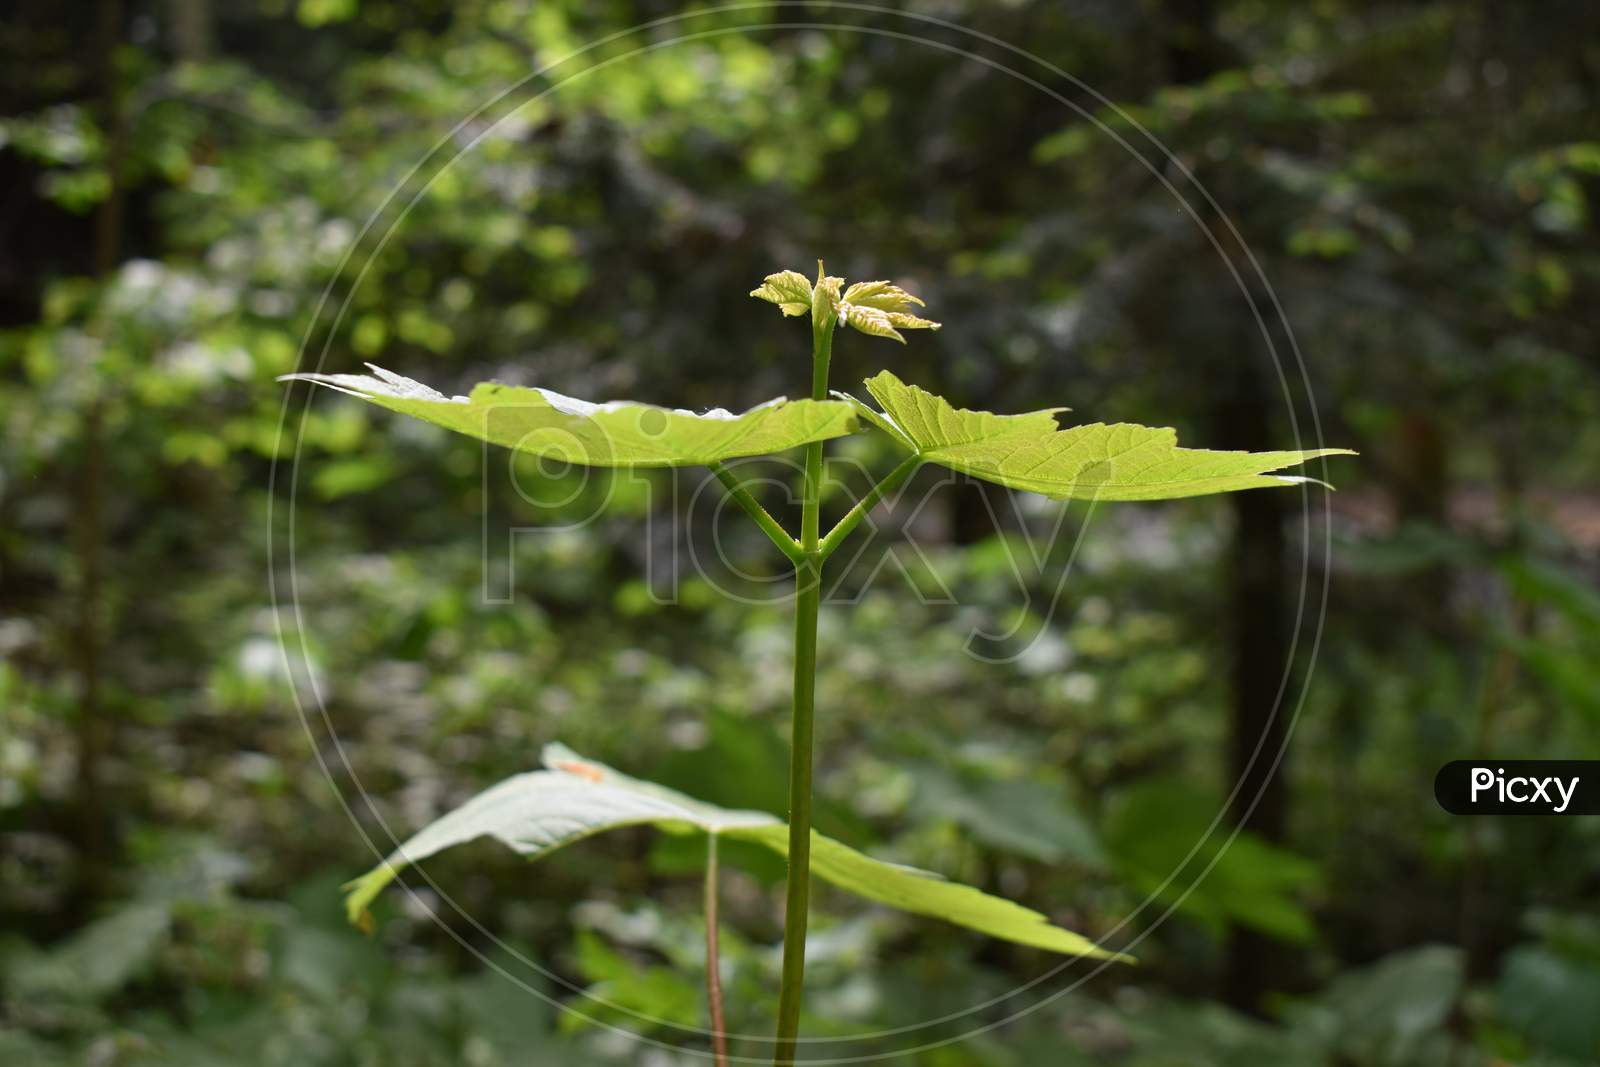 Young maple tree is growing in a forest in Liechtenstein 24.4.2020